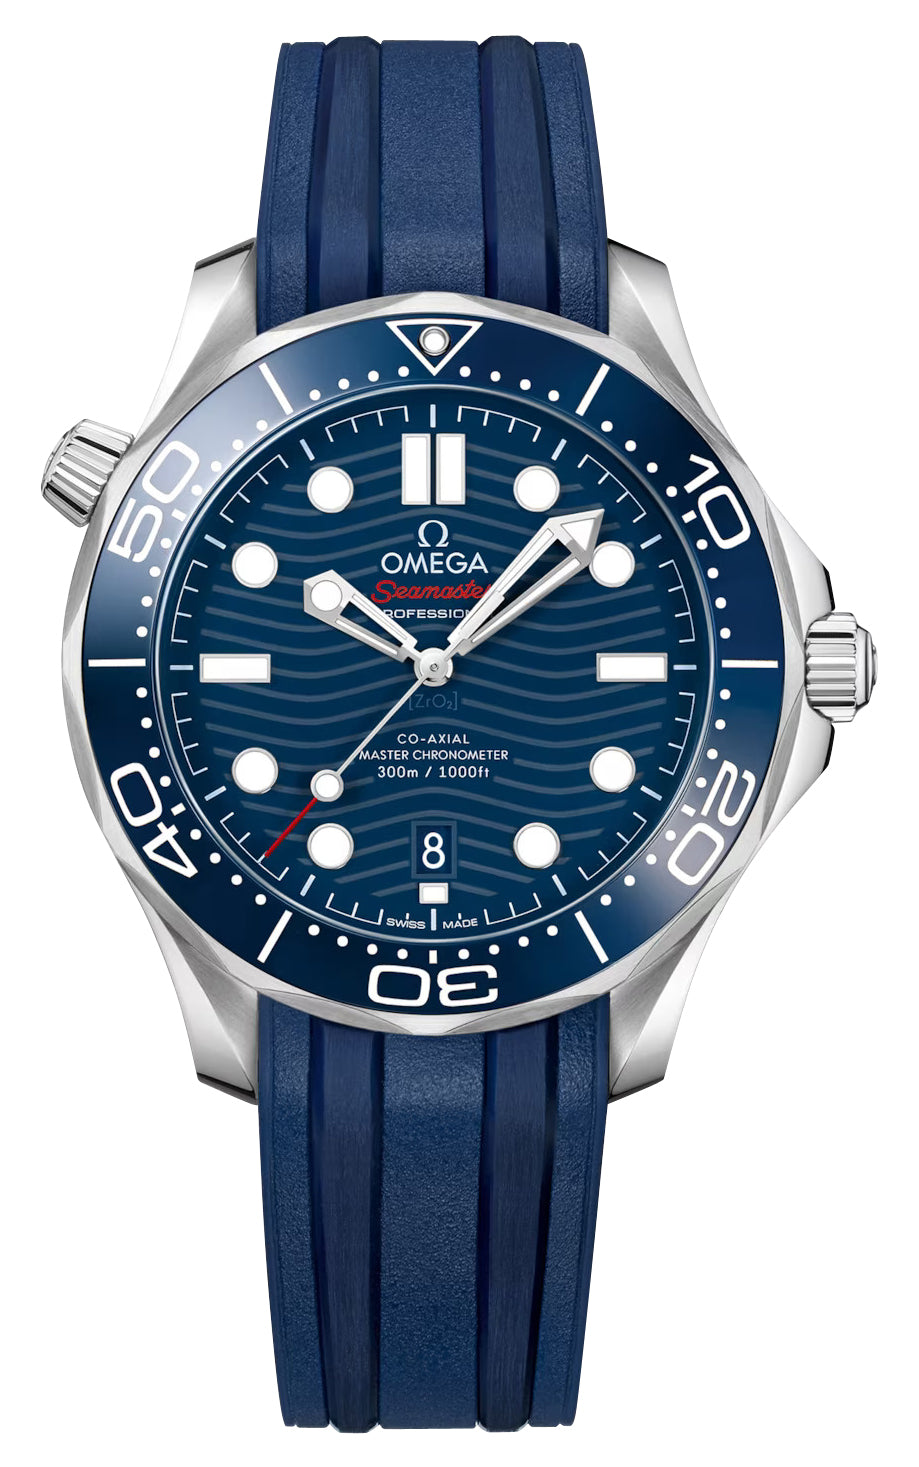 update alt-text with template Watches - Mens-Omega-210.32.42.20.03.001-40 - 45 mm, blue, COSC, date, divers, mens, menswatches, new arrivals, Omega, round, rpSKU_215.30.44.21.03.001, rpSKU_220.10.41.21.01.001, rpSKU_220.10.41.21.03.004, rpSKU_220.10.41.21.10.001, rpSKU_428.17.36.60.05.001, rubber, Seamaster Diver 300M, stainless steel case, swiss automatic, uni-directional rotating bezel, watches-Watches & Beyond